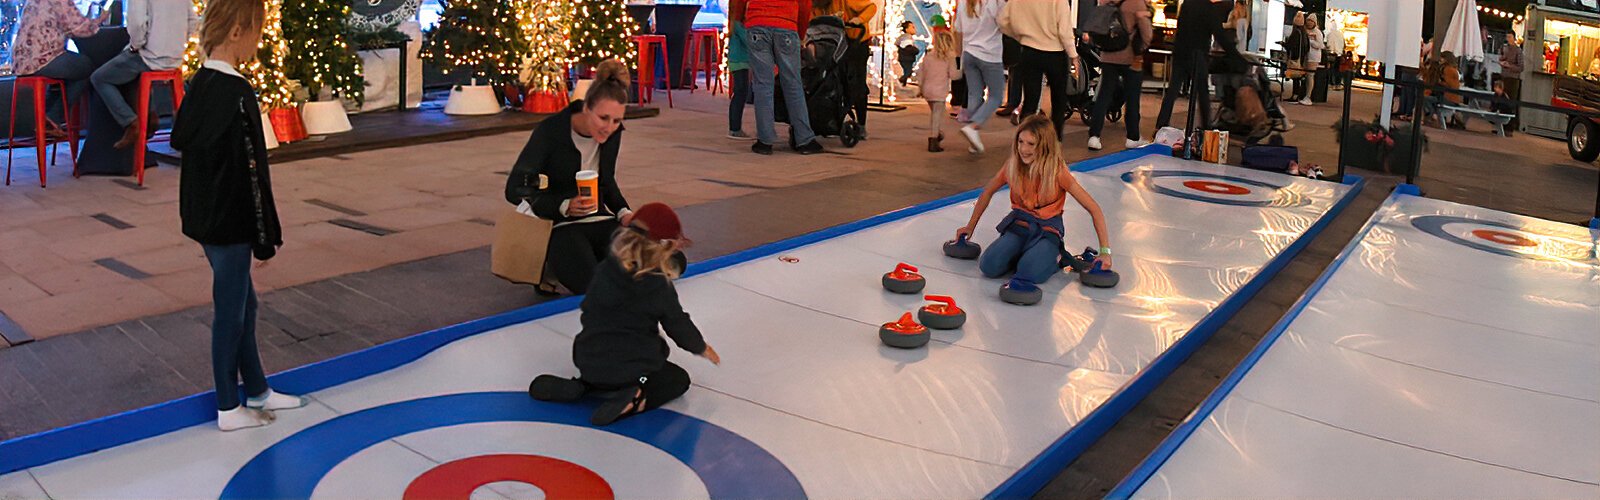 New this year at Winter Village, curling is an activity some young people may find puzzling.